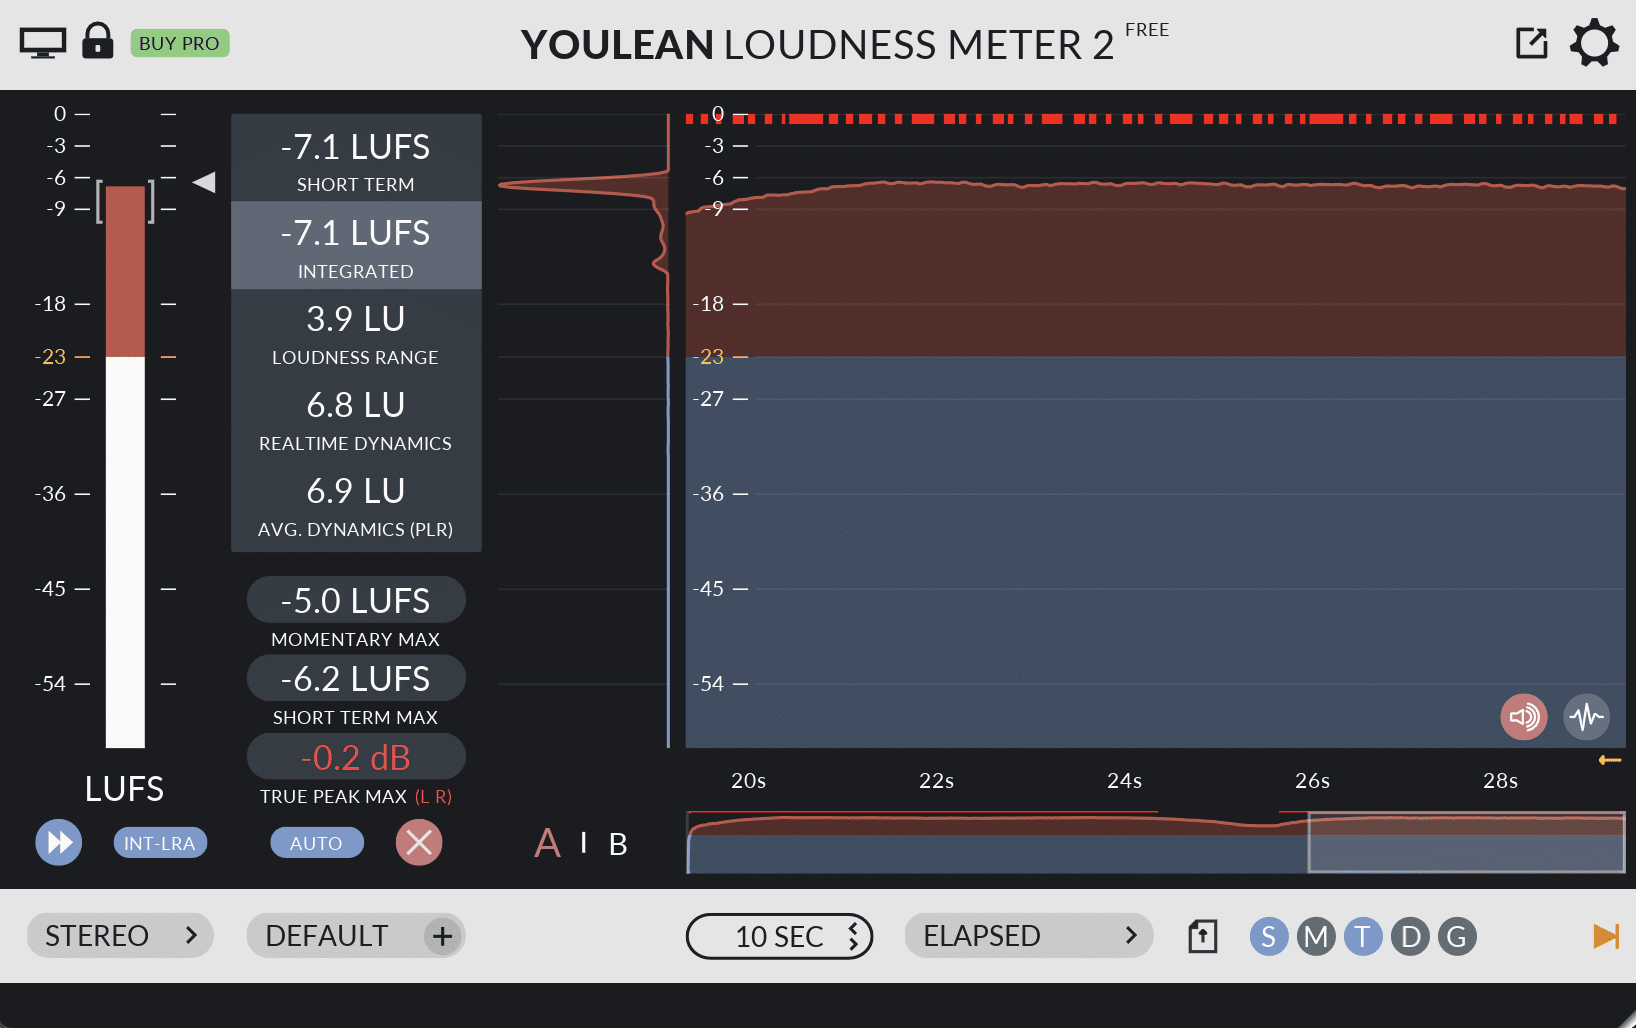 Youlean Loudness Meter 2 on Liquid Drum & Bass track